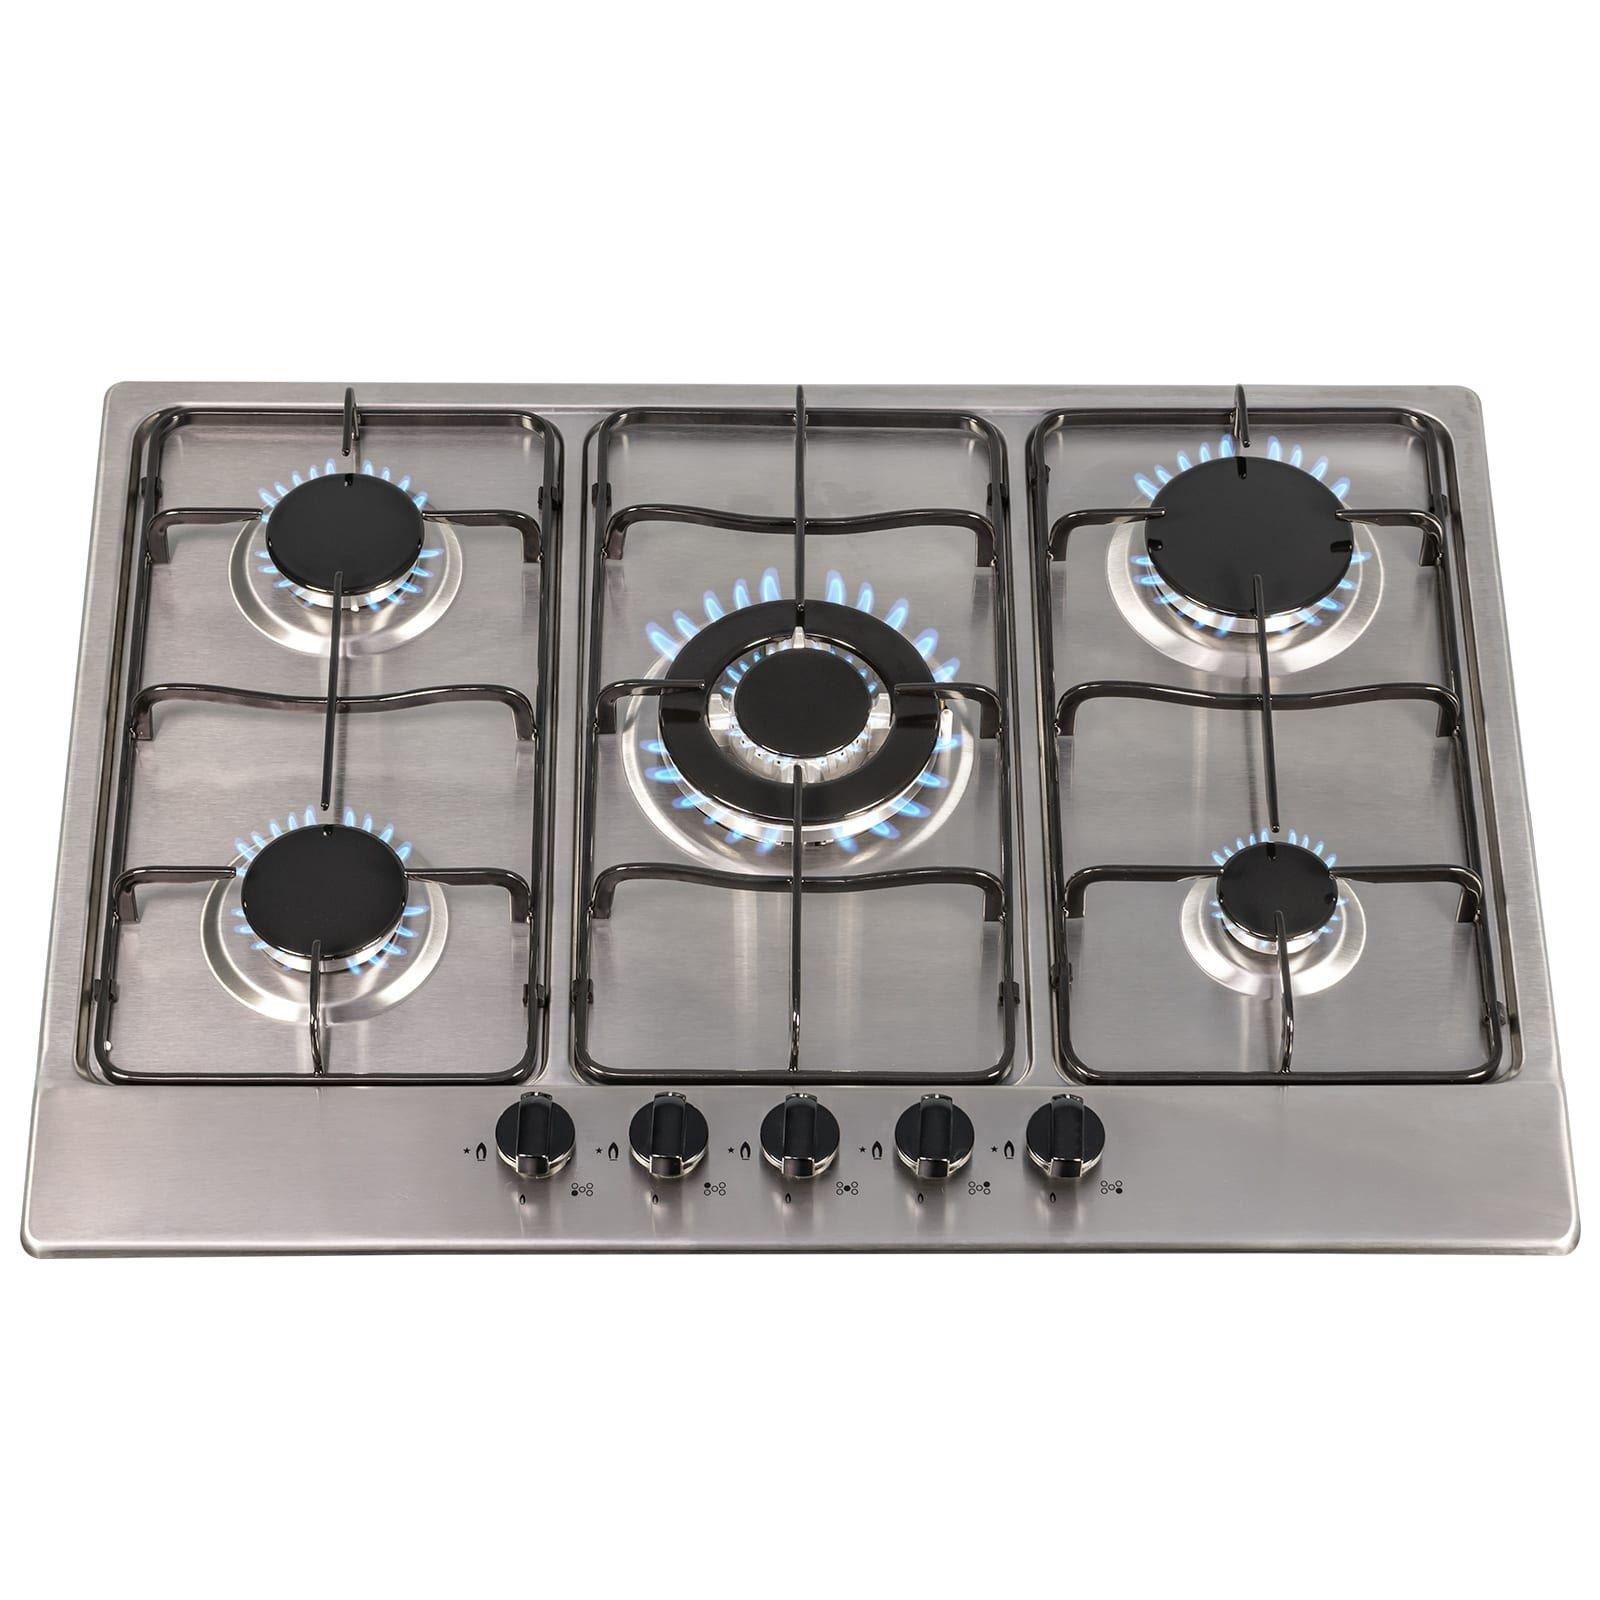 70cm 5 Burner Gas Hob In Stainless Steel With Enamel Pan Stands- SSG702SS